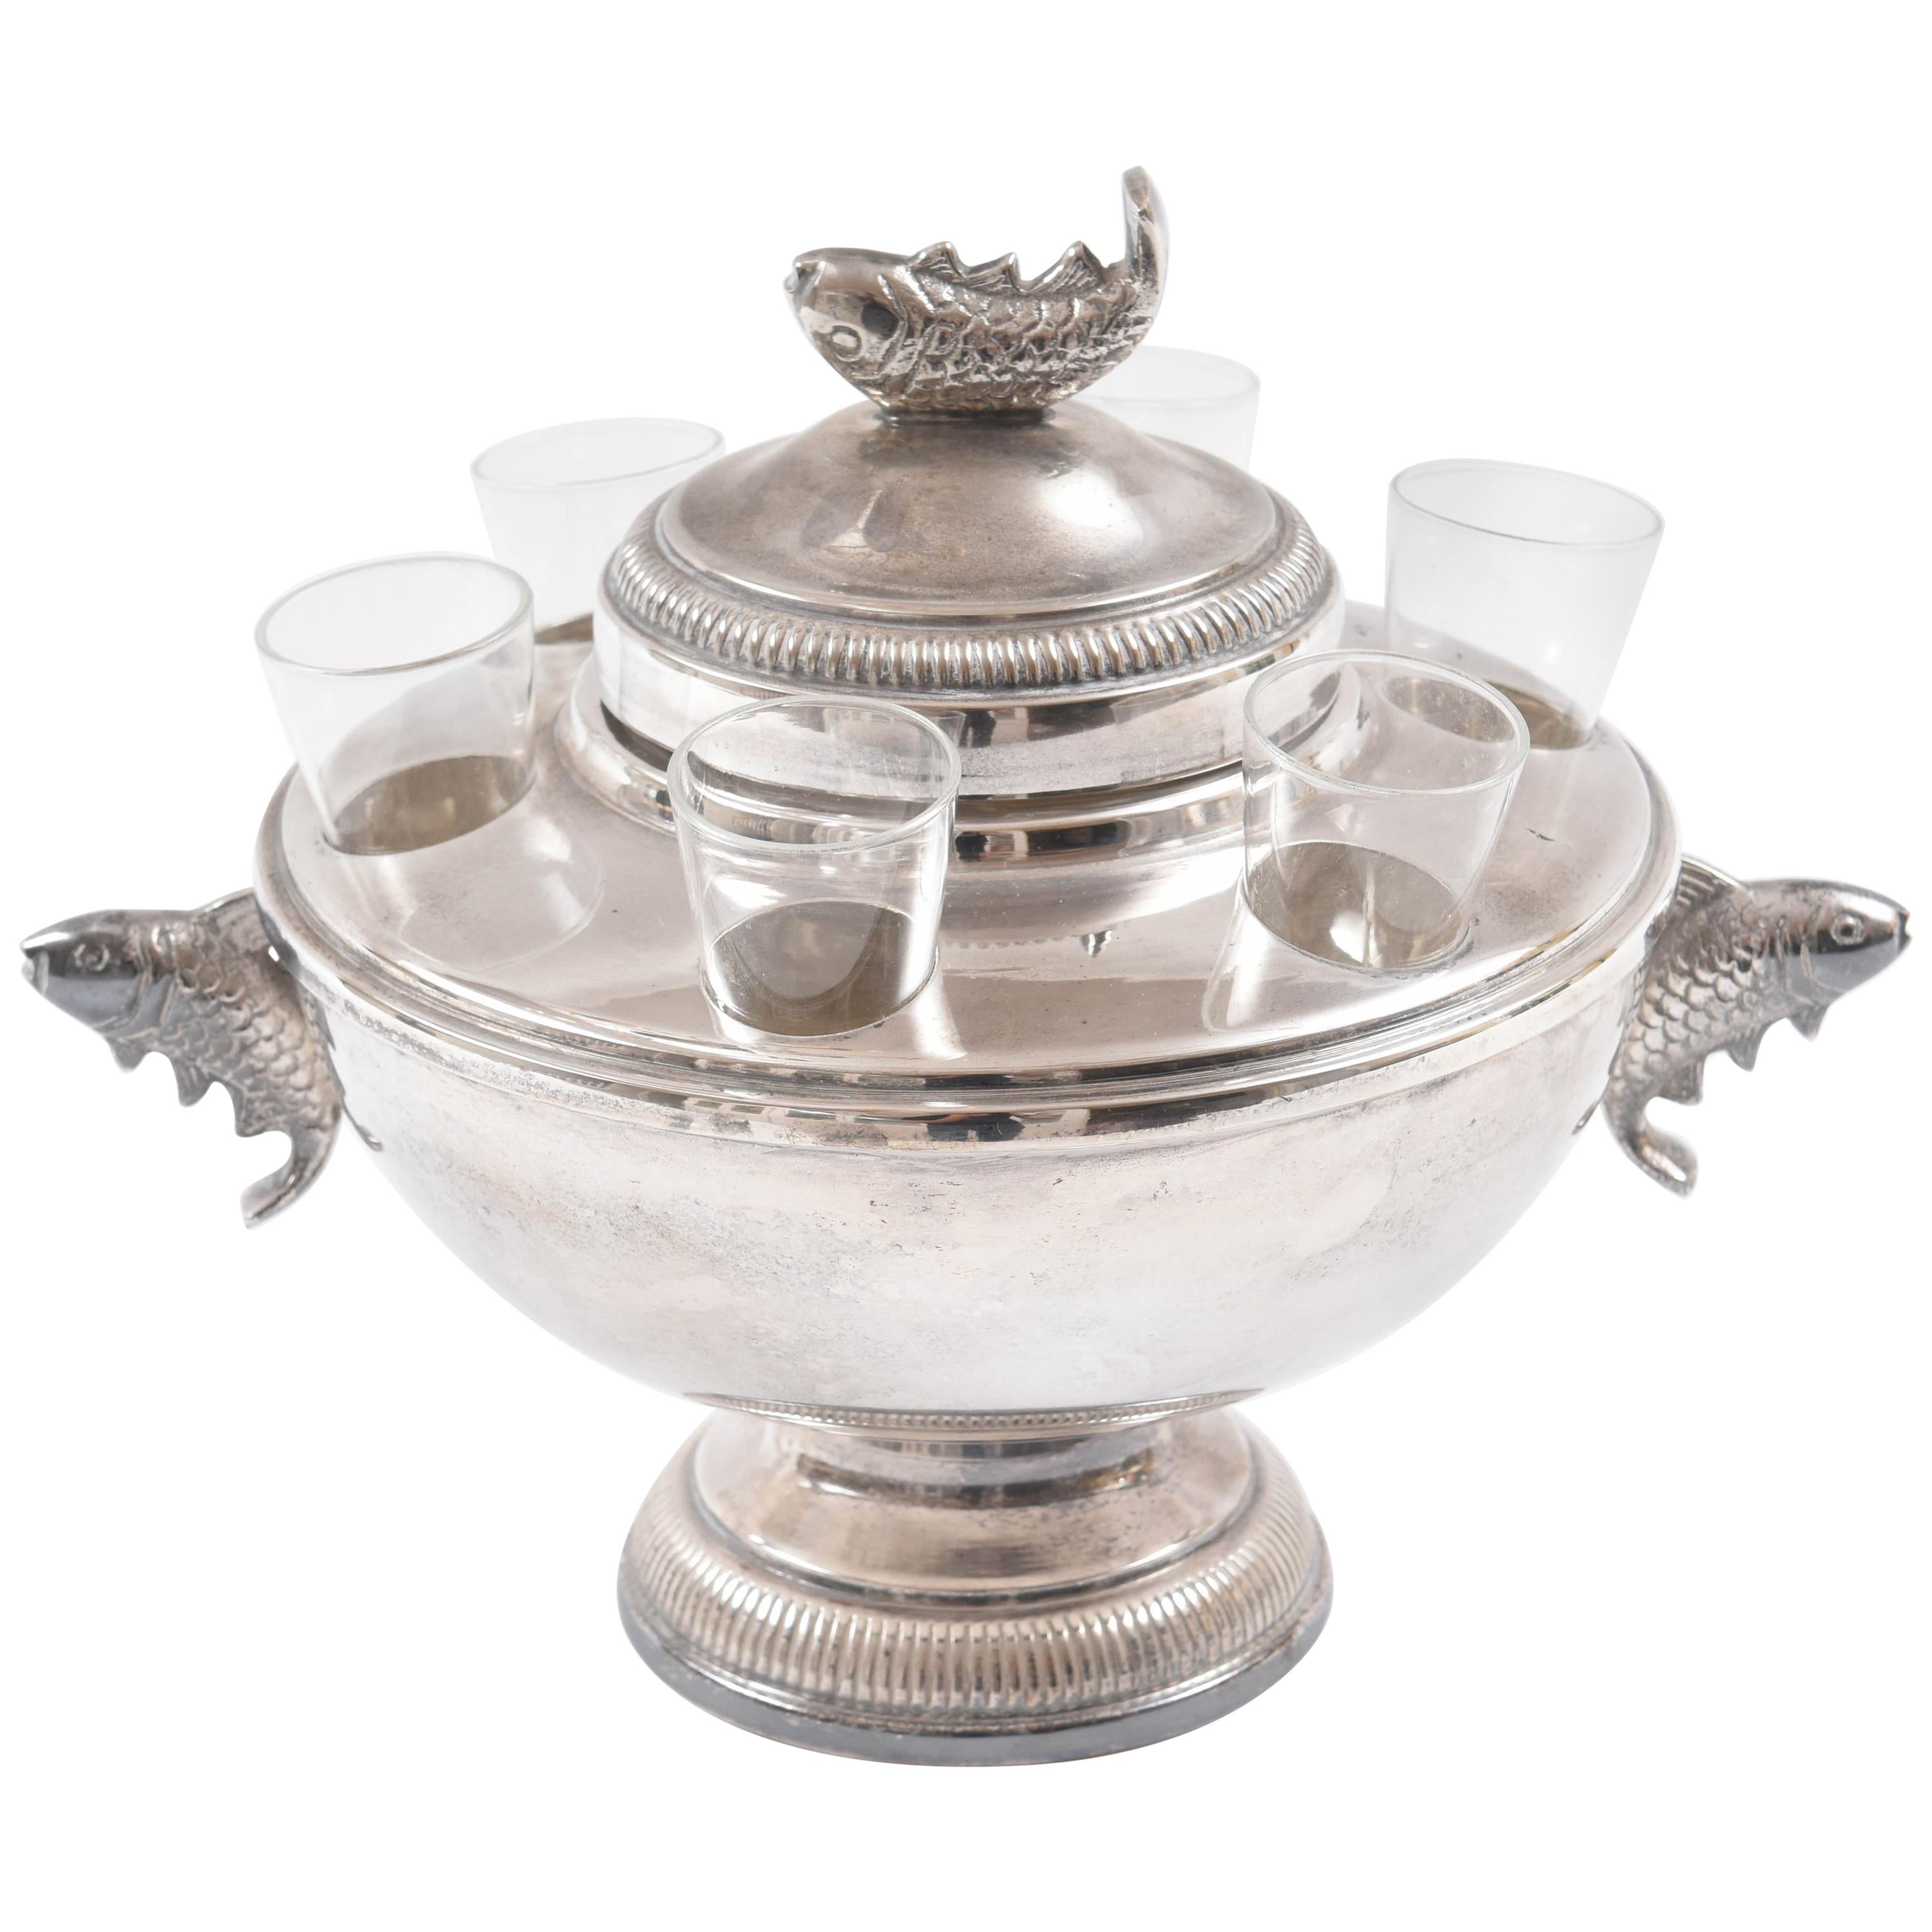 Vintage Caviar & Vodka Server, Silver Plate and Glass with Figural Fish Handles